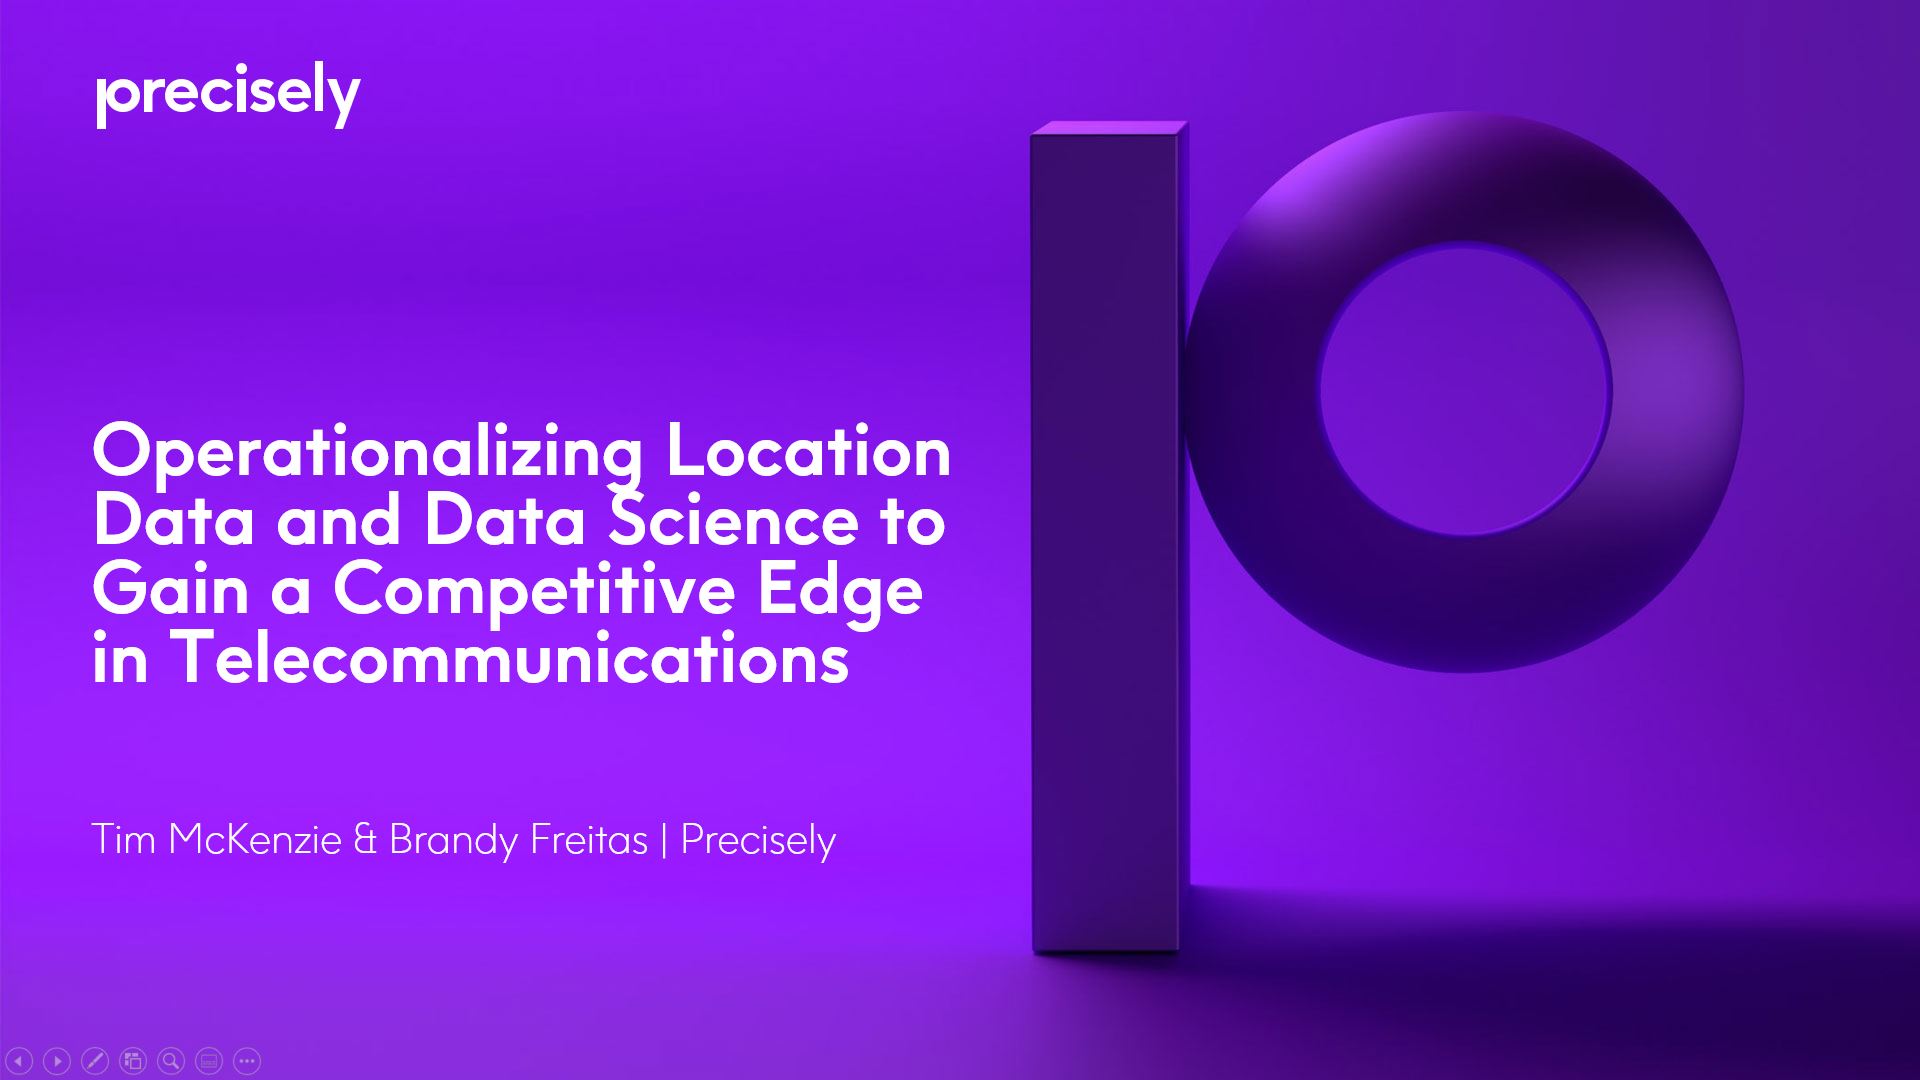 Operationalizing Location Data and Data Science to Gain a Competitive Edge in Telecommunications